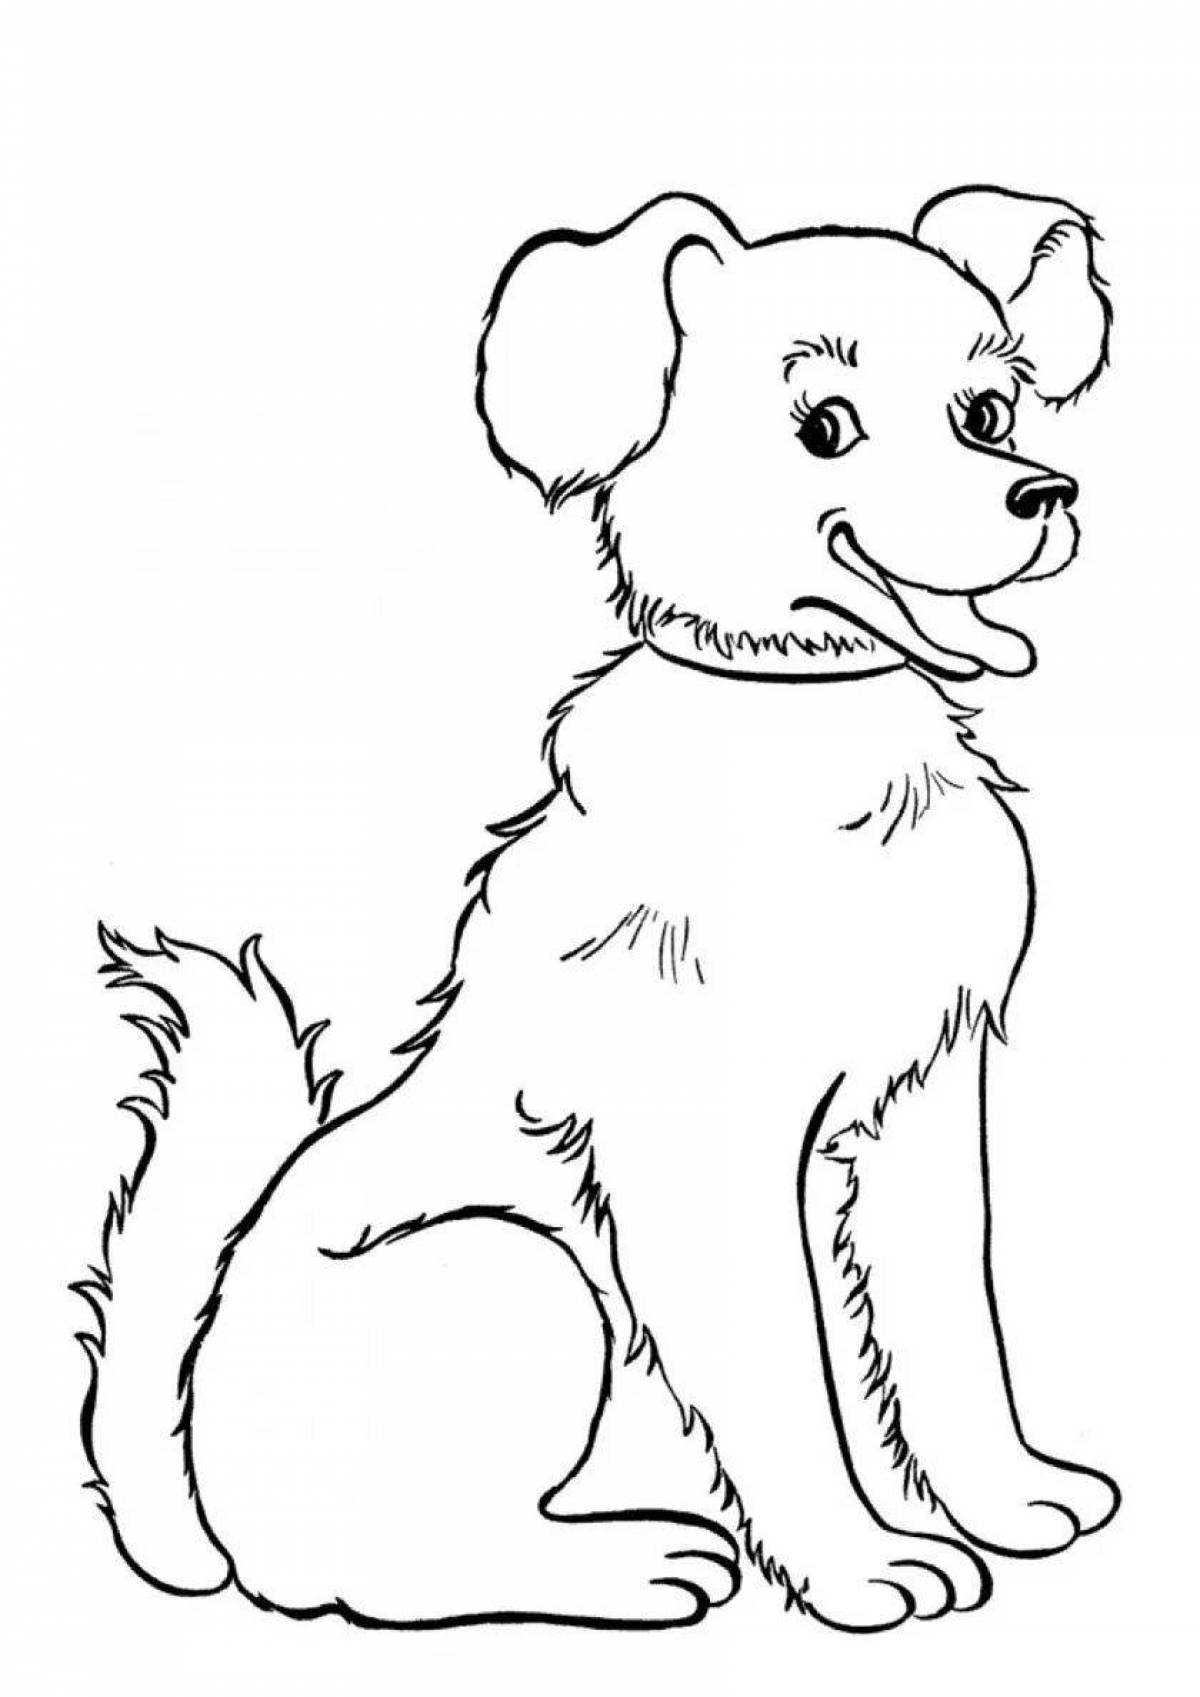 Smart dog coloring book for kids 4-5 years old